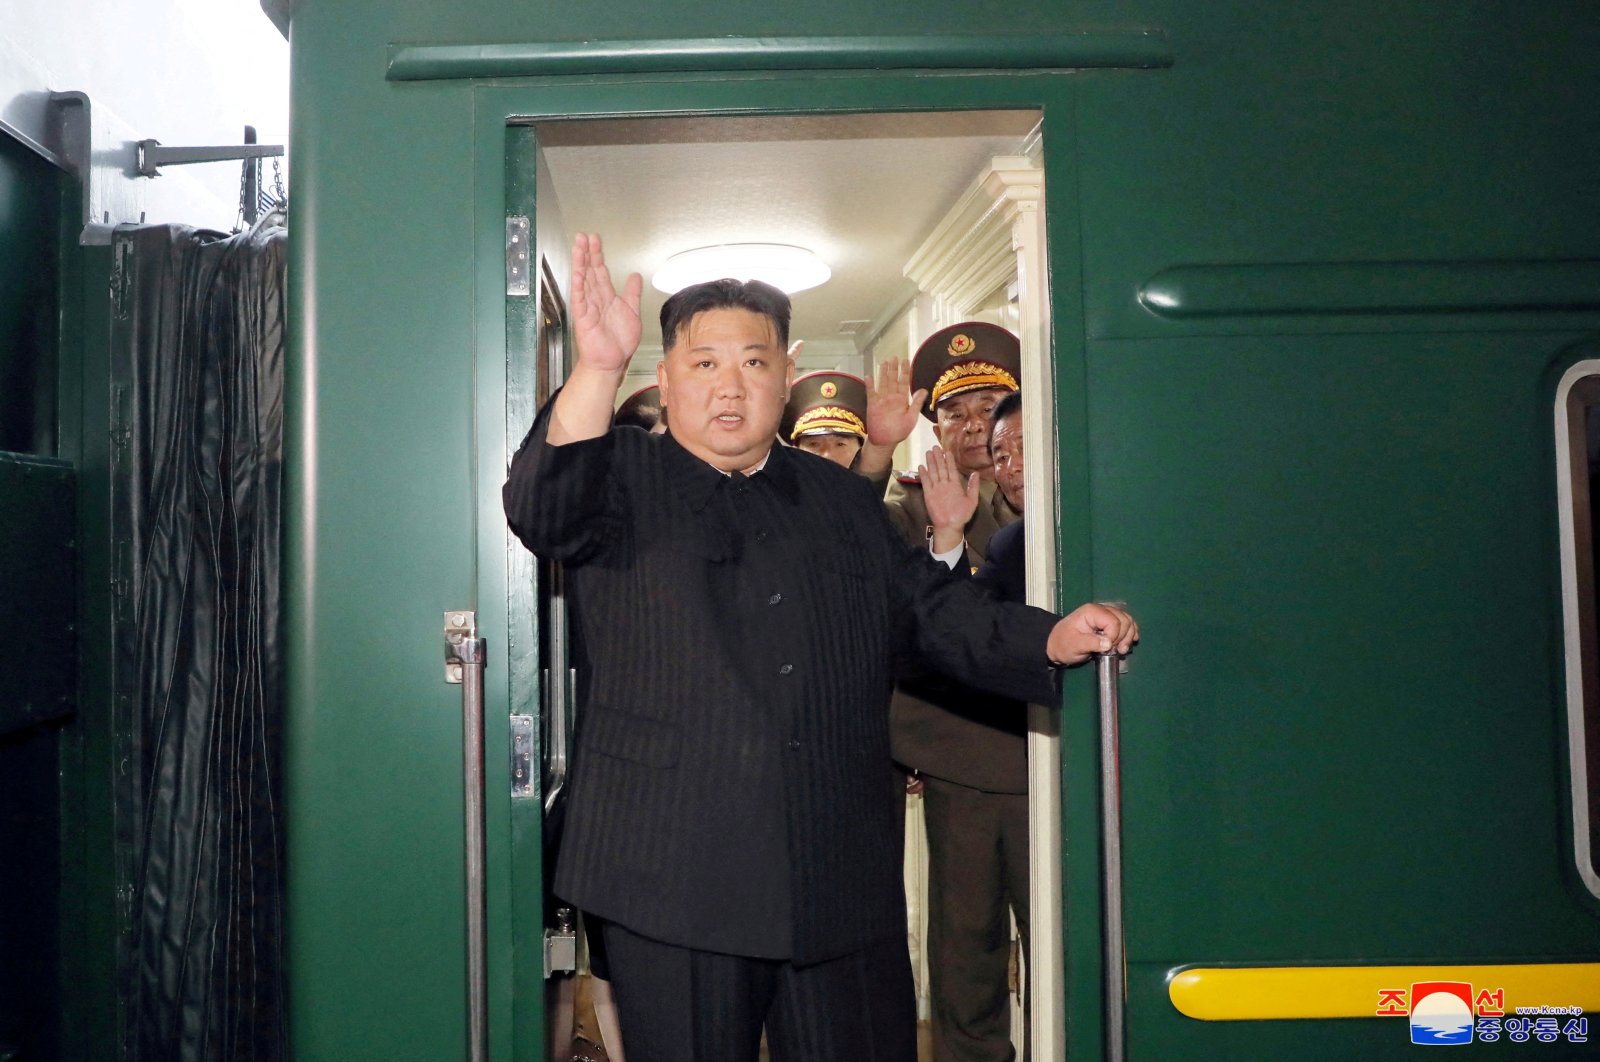 N. Korea’s Kim arrives in Russia amid arms deal warning from US